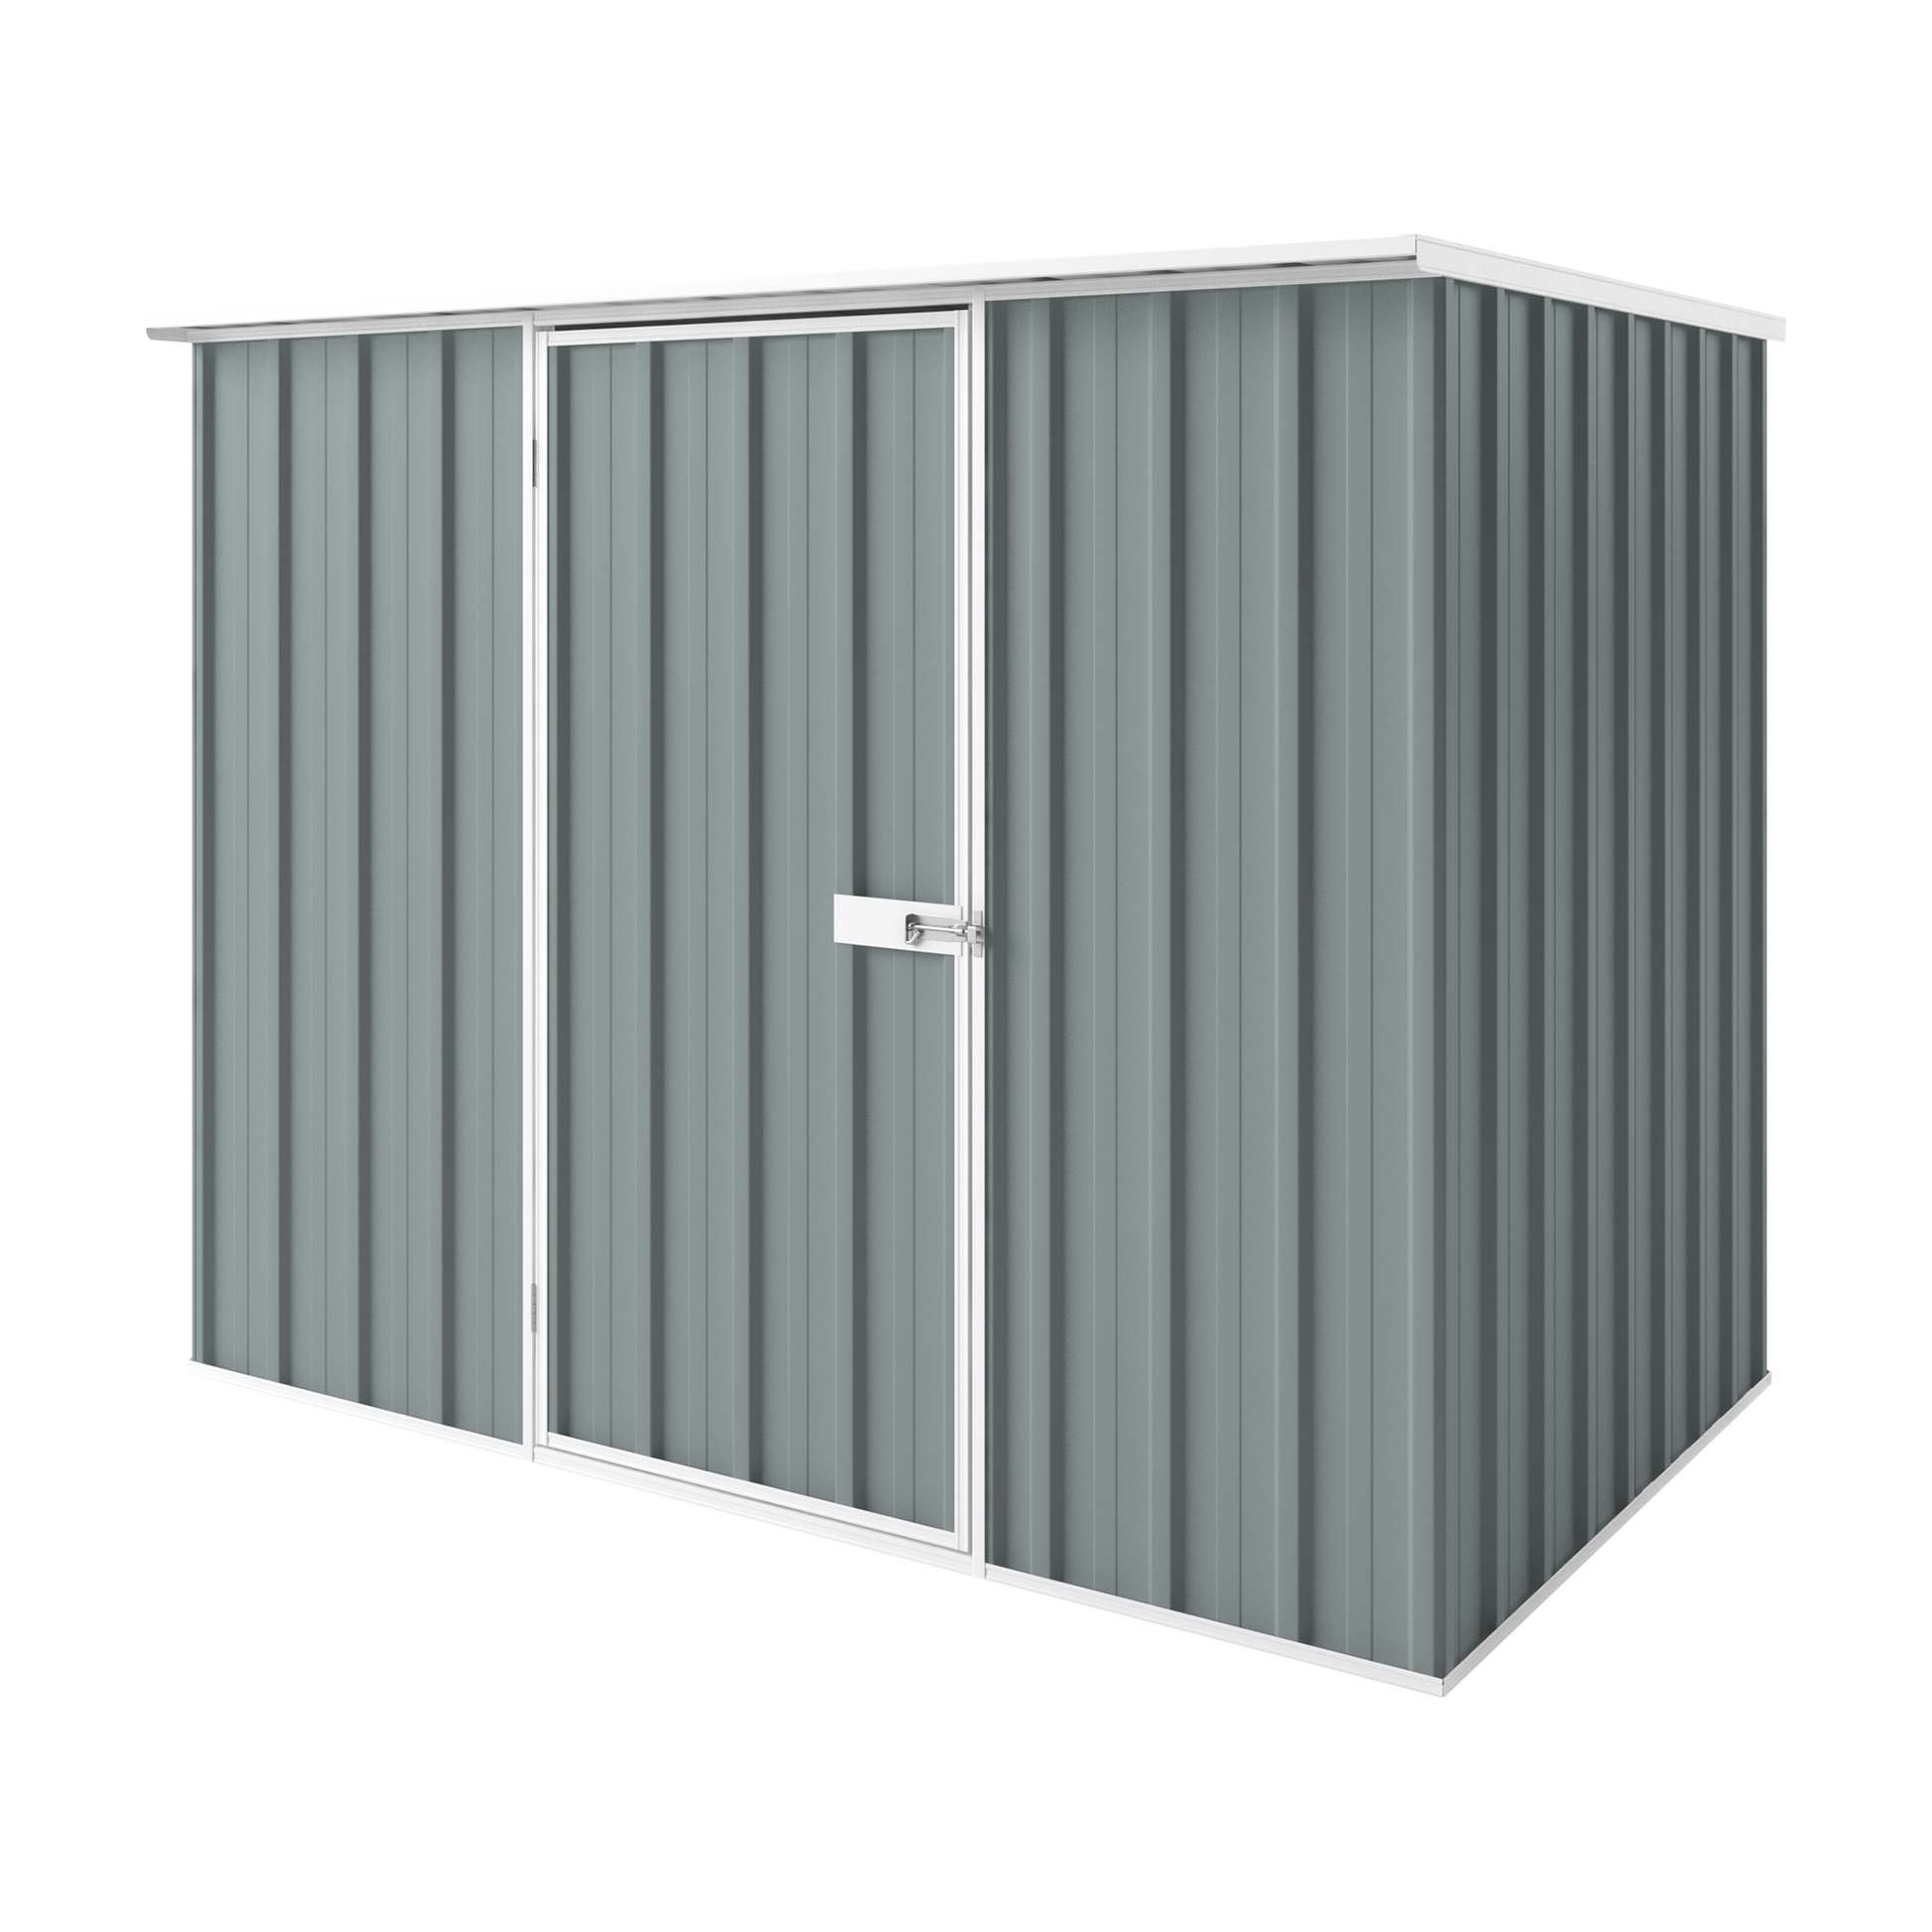 2.25m x 1.5m Flat Roof Garden Shed - EasyShed